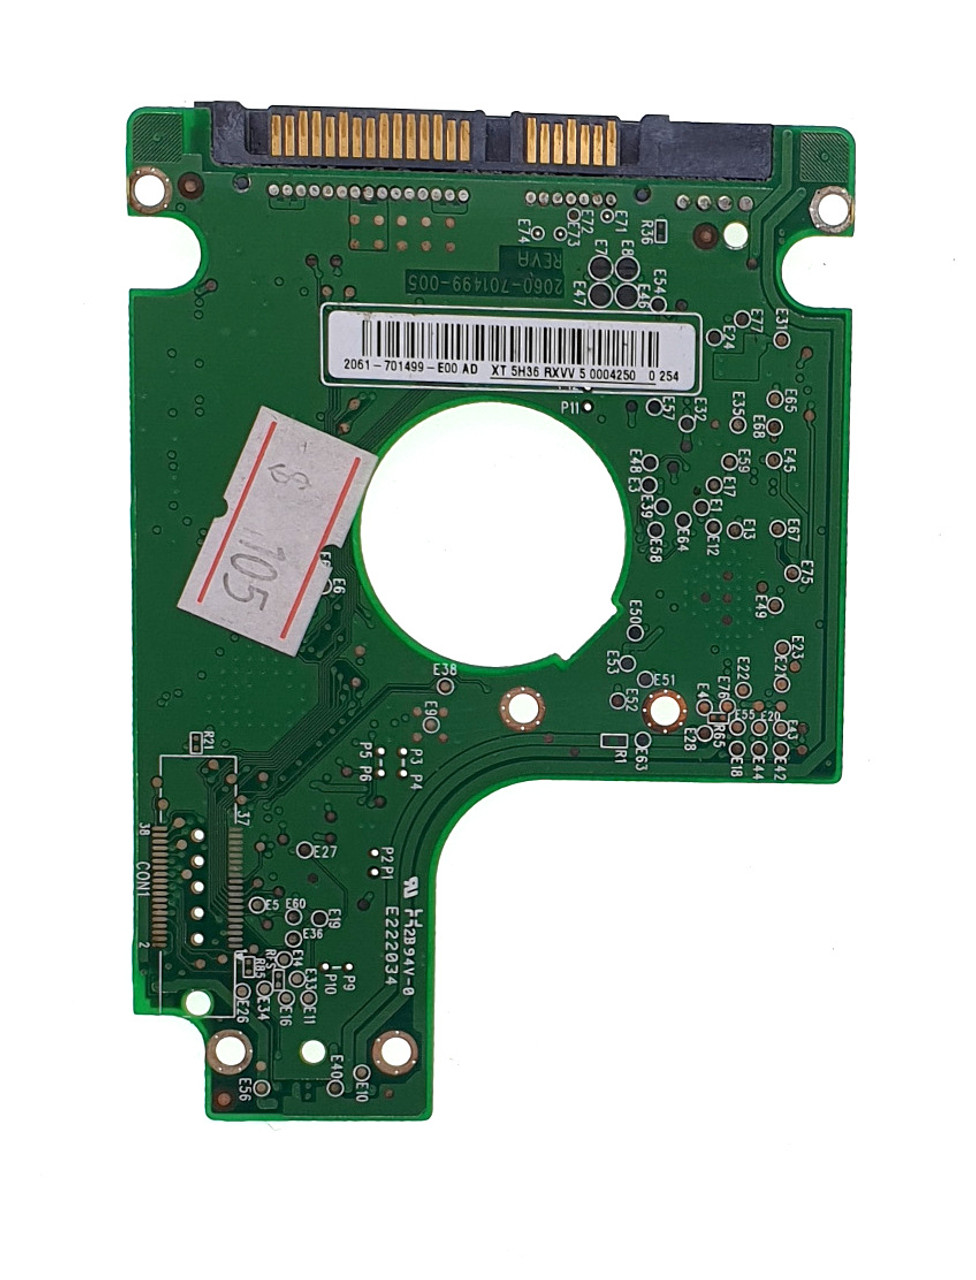 WD (Western Digital) 2.5" SATA Hard Drive Laptop HDD WD3200BEVT WD2500BEVT WD800BEVT WD1600BEVS Logic Control Circuit PCB Board 2060-701499-005